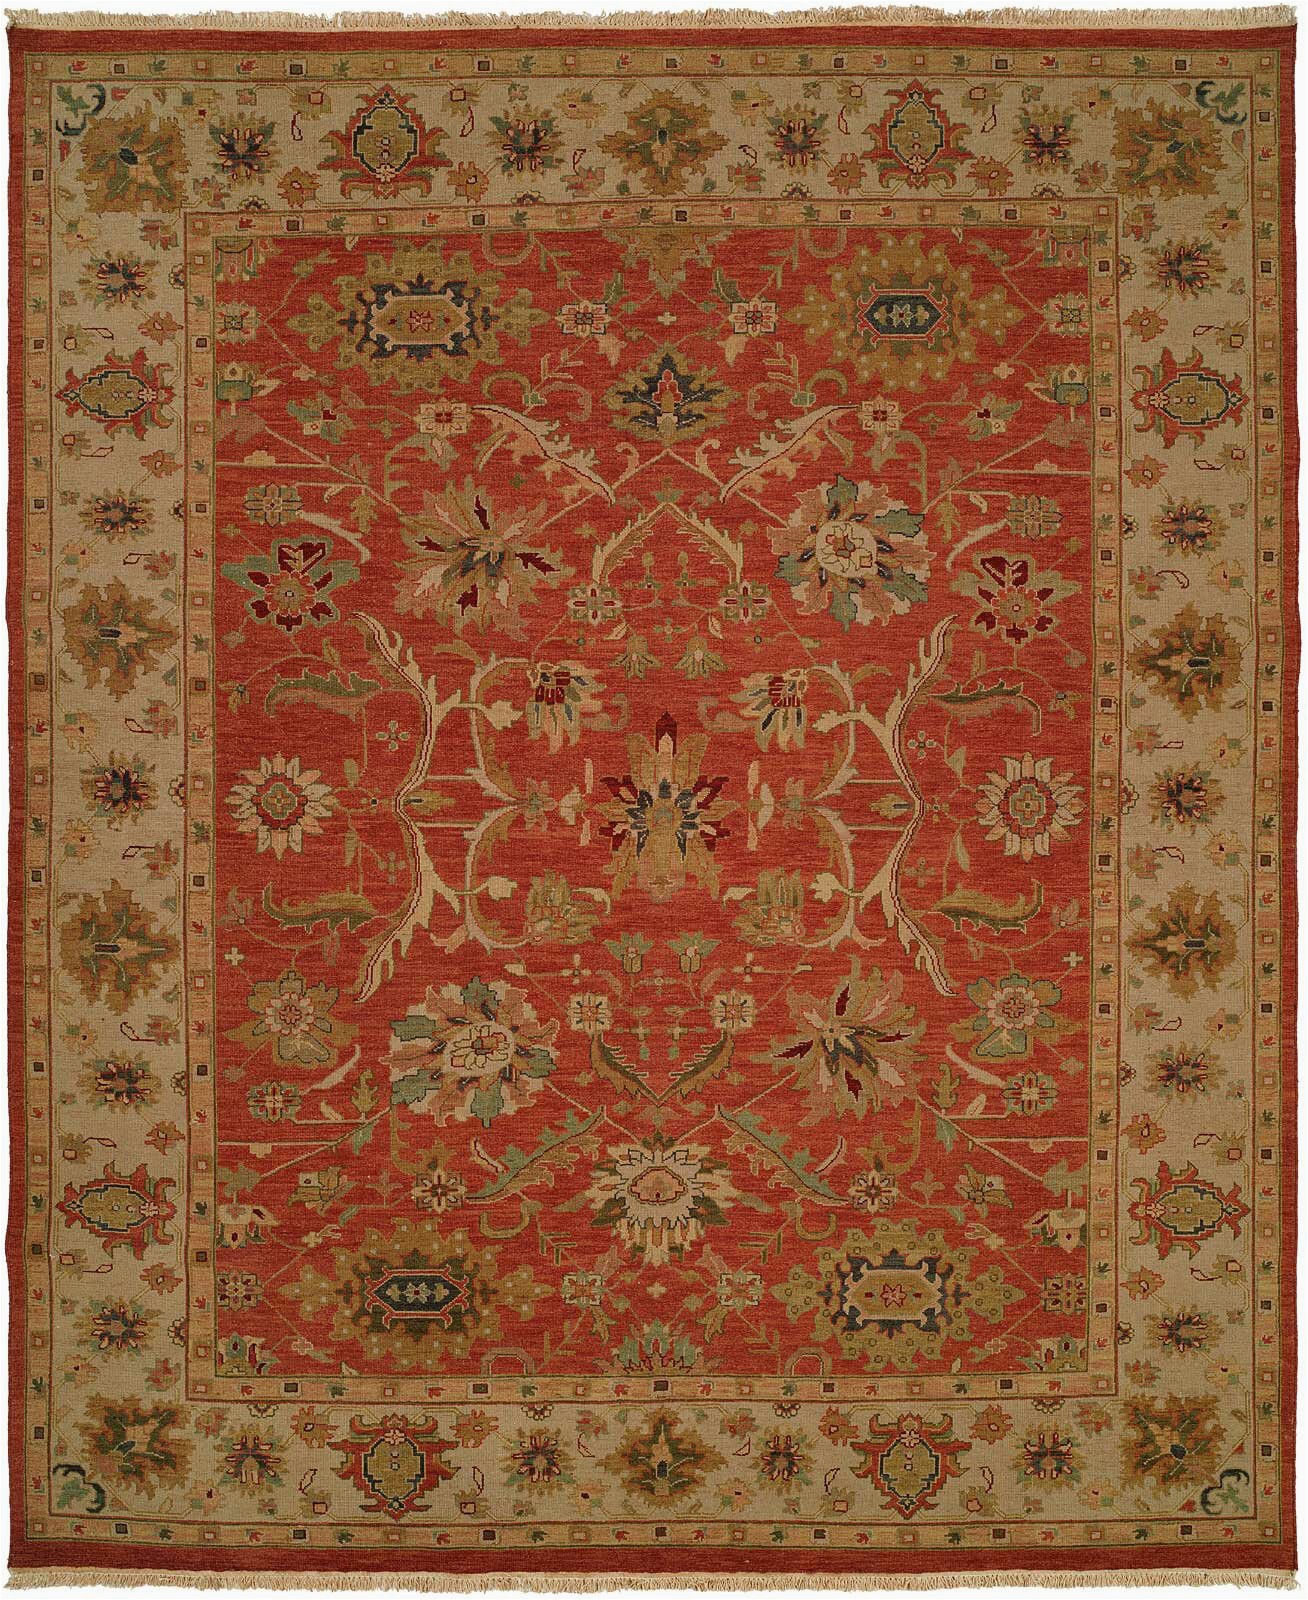 Brown and Rust Colored area Rugs oriental Hand Knotted Wool Rust Red Beige area Rug